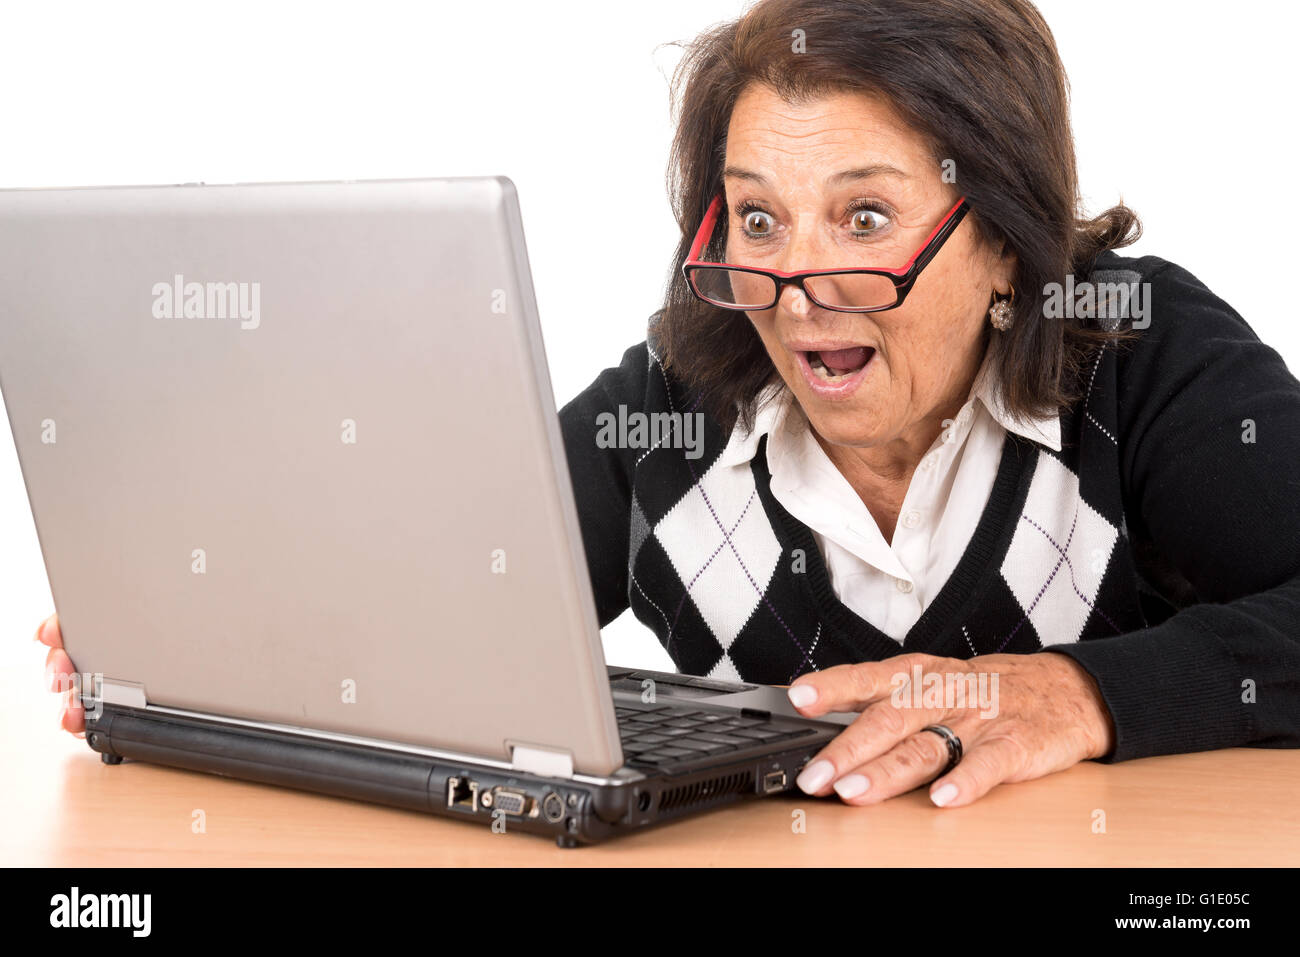 Surprised beautiful senior woman looking at a laptop isolated in white Stock Photo